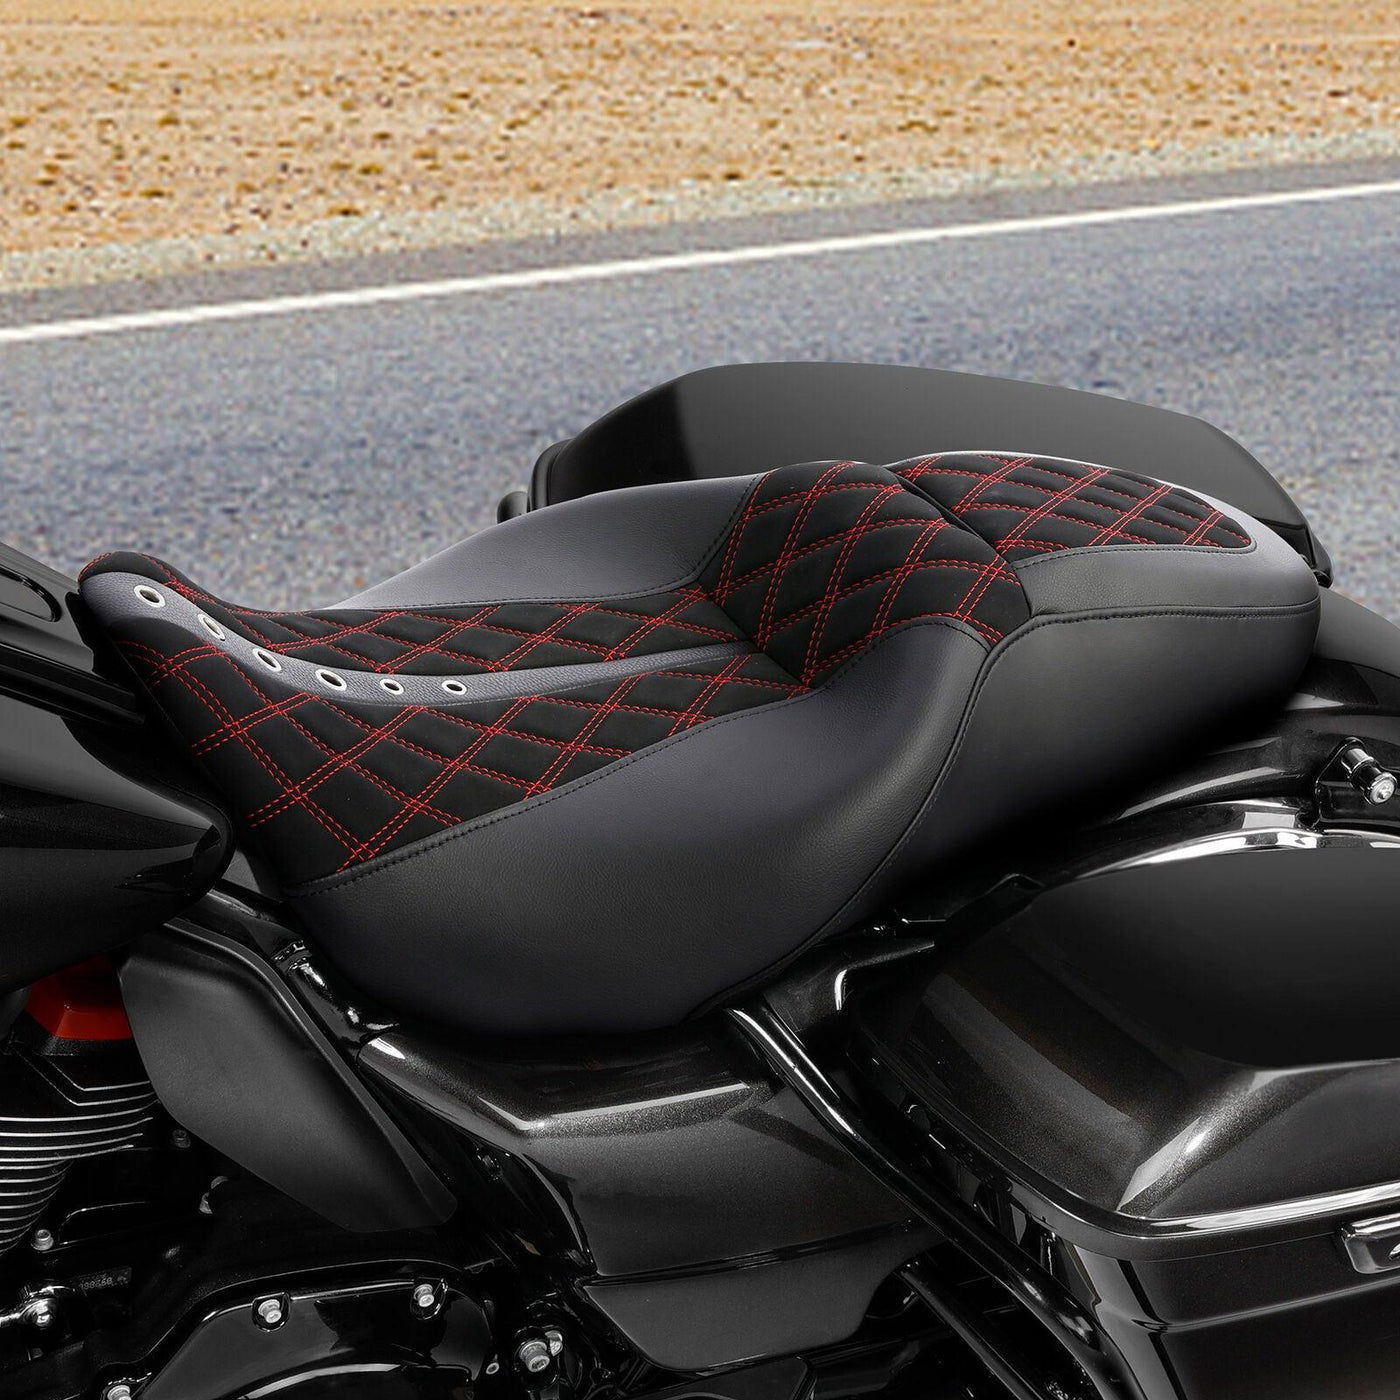 Driver Passenger Two Up Seat Fit For Harley Touring Road King Road Glide 2009-22 - Moto Life Products